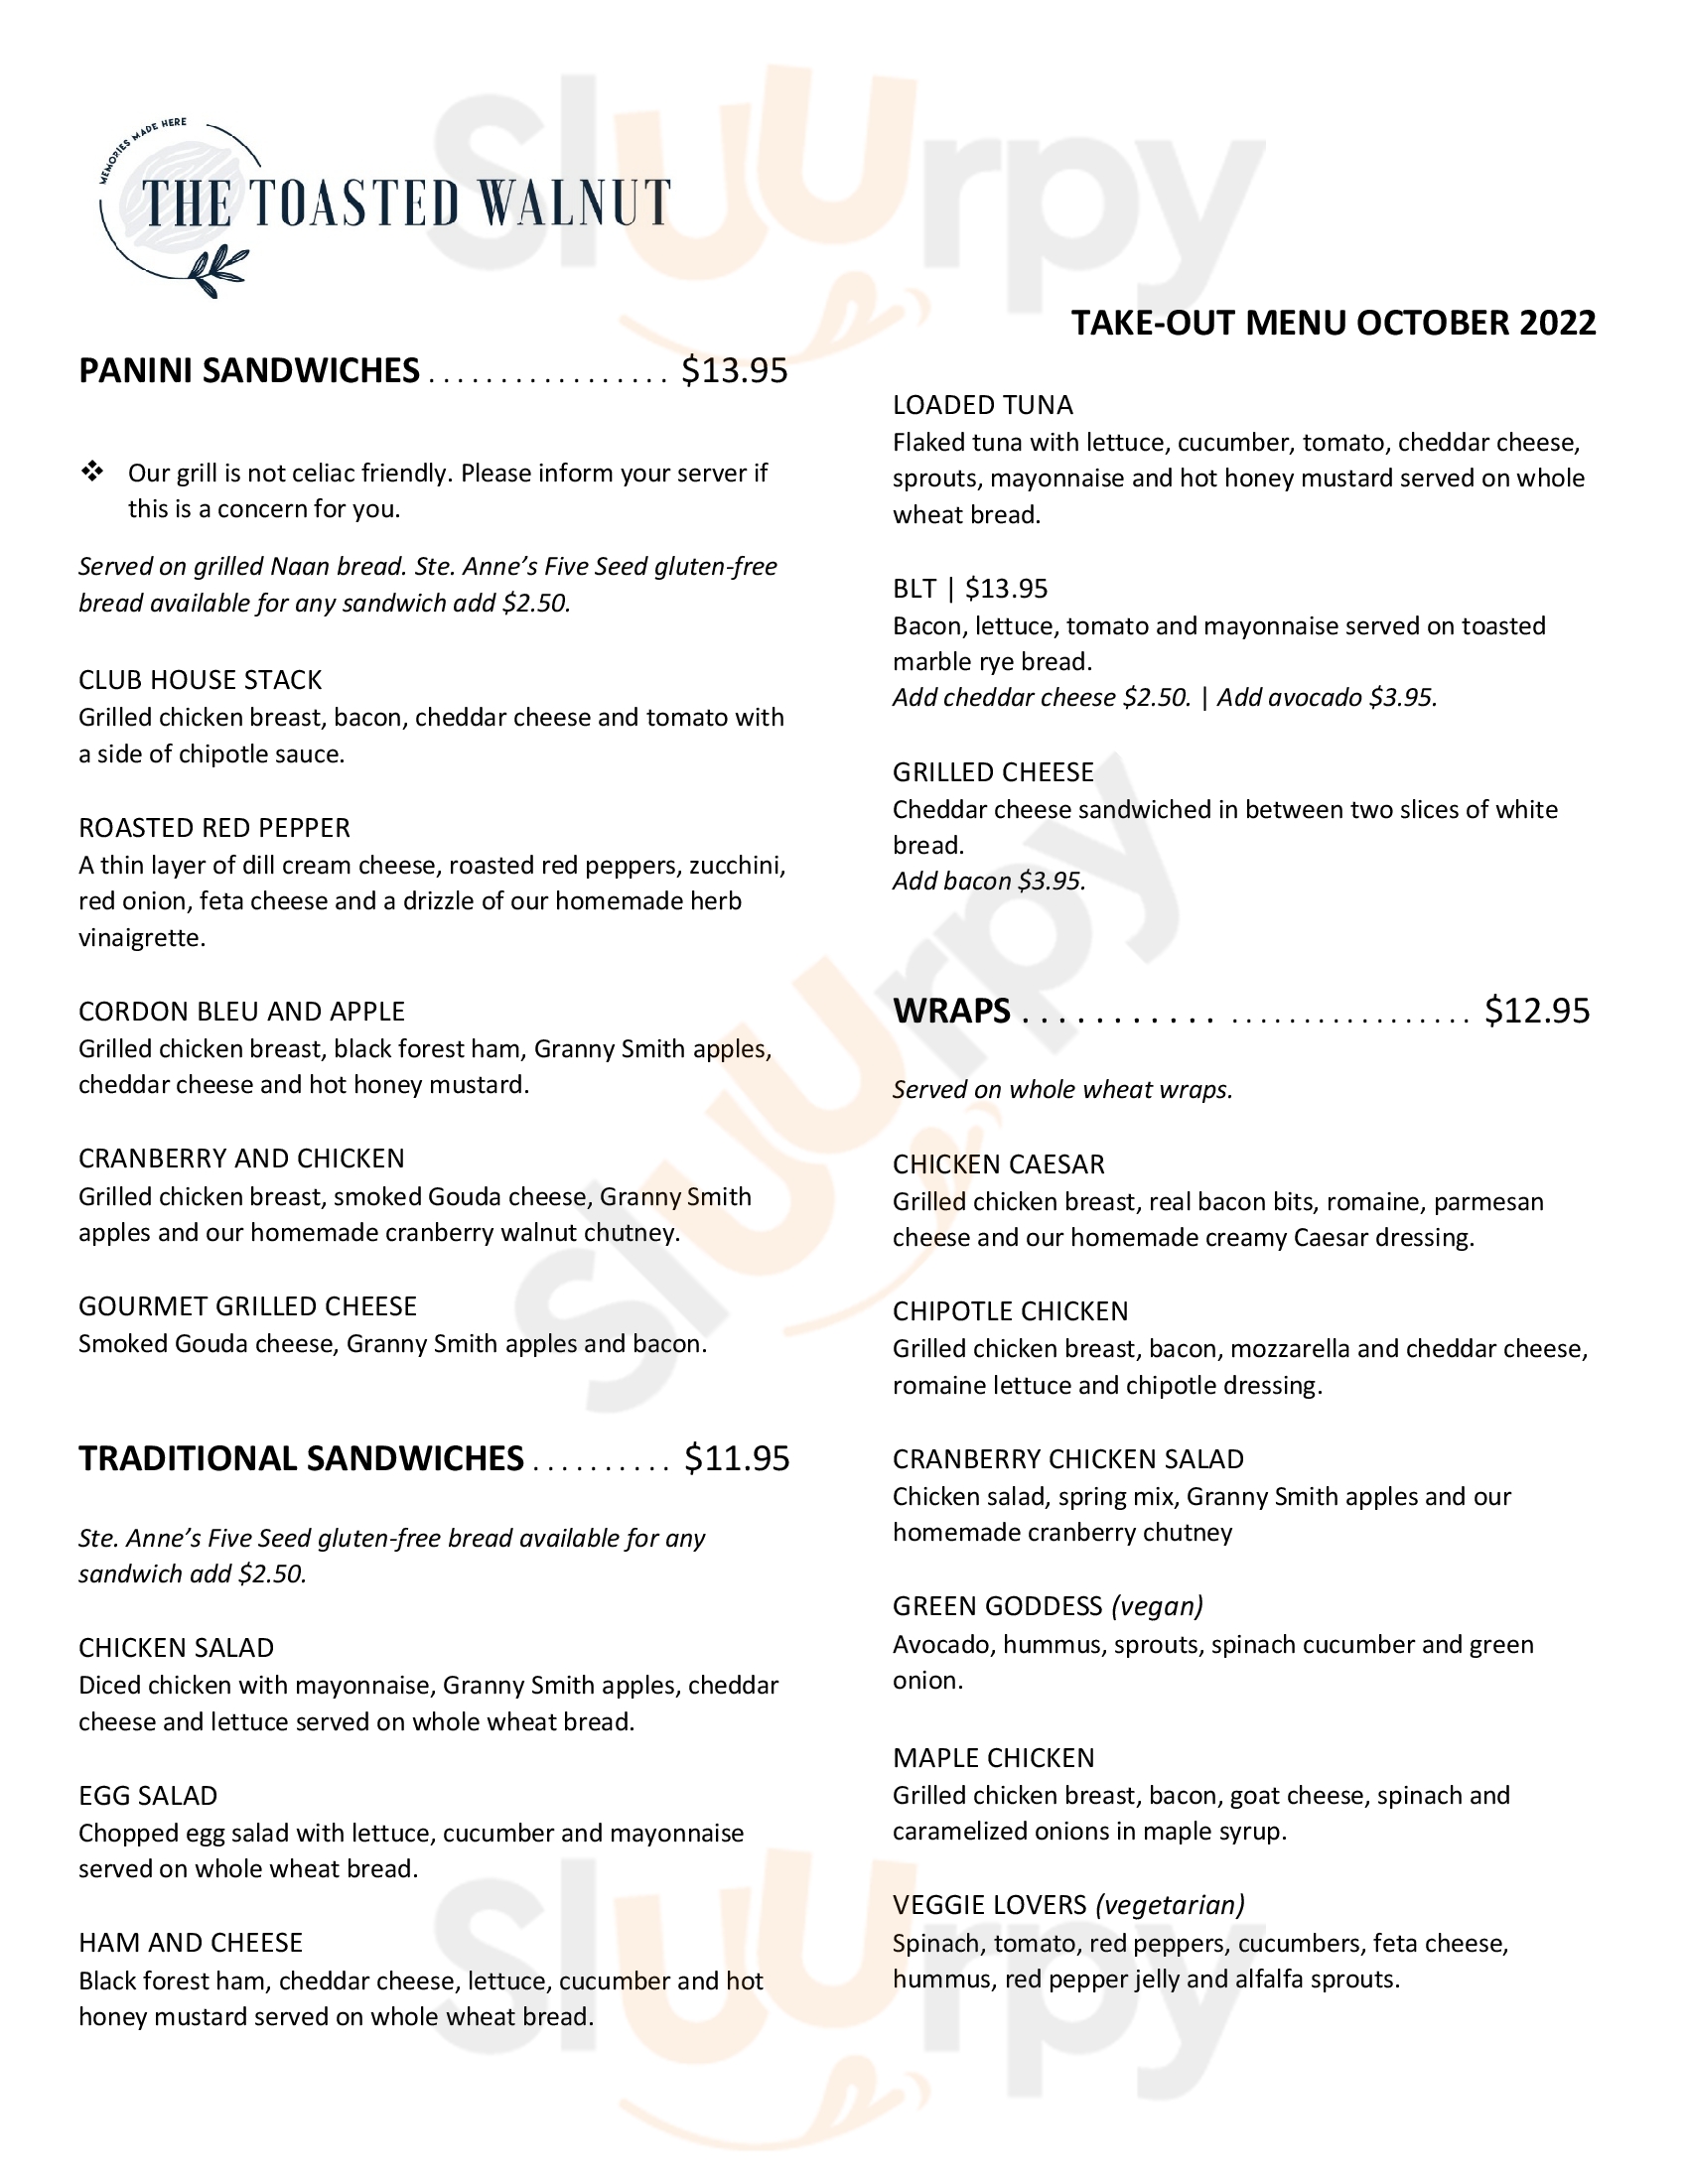 The Toasted Walnut Bowmanville Menu - 1